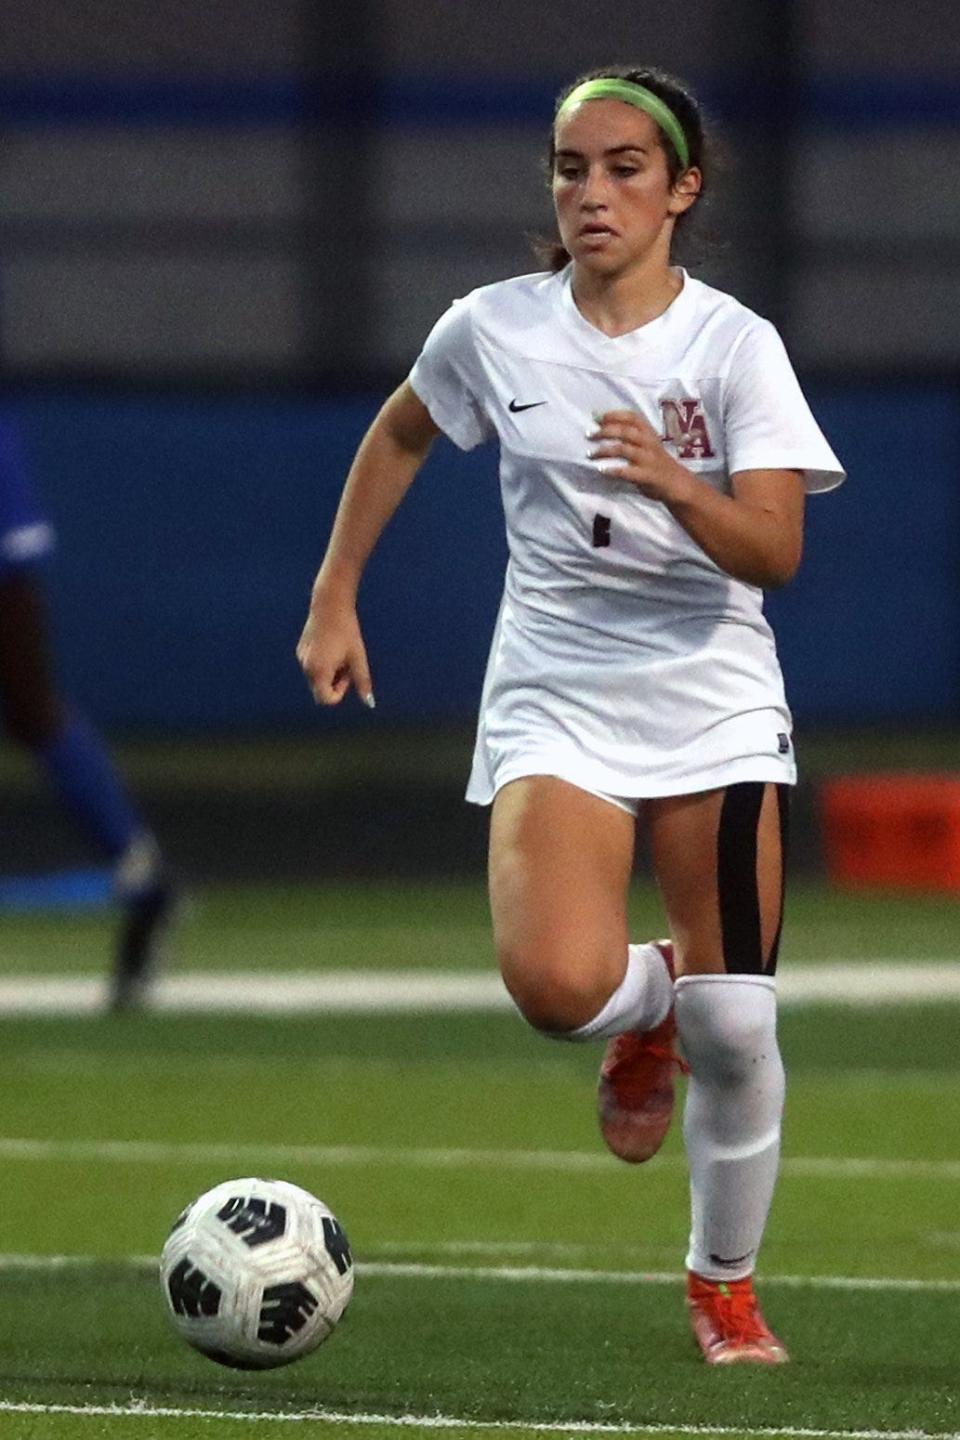 Allie Metcalf of New Albany is one of the top soccer players in the state of Ohio in 2022.